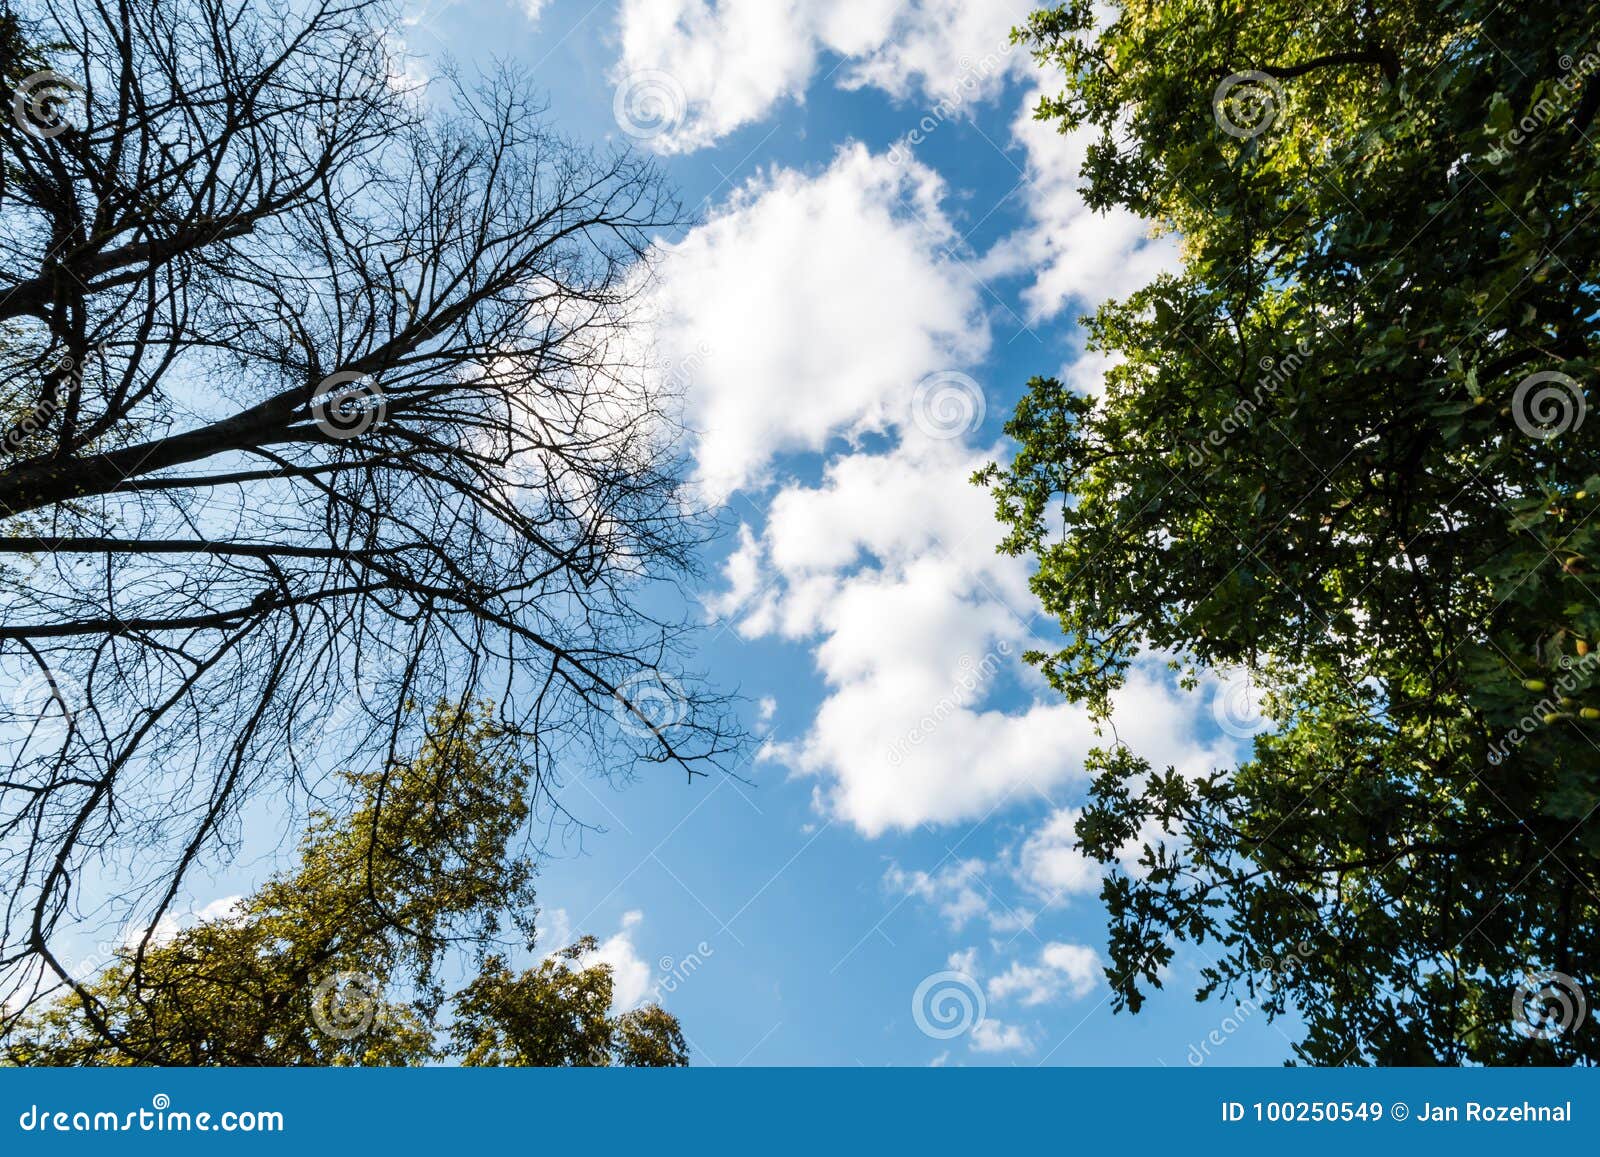 Black Dry Branches of Tree without Leaves Stock Image - Image of ...